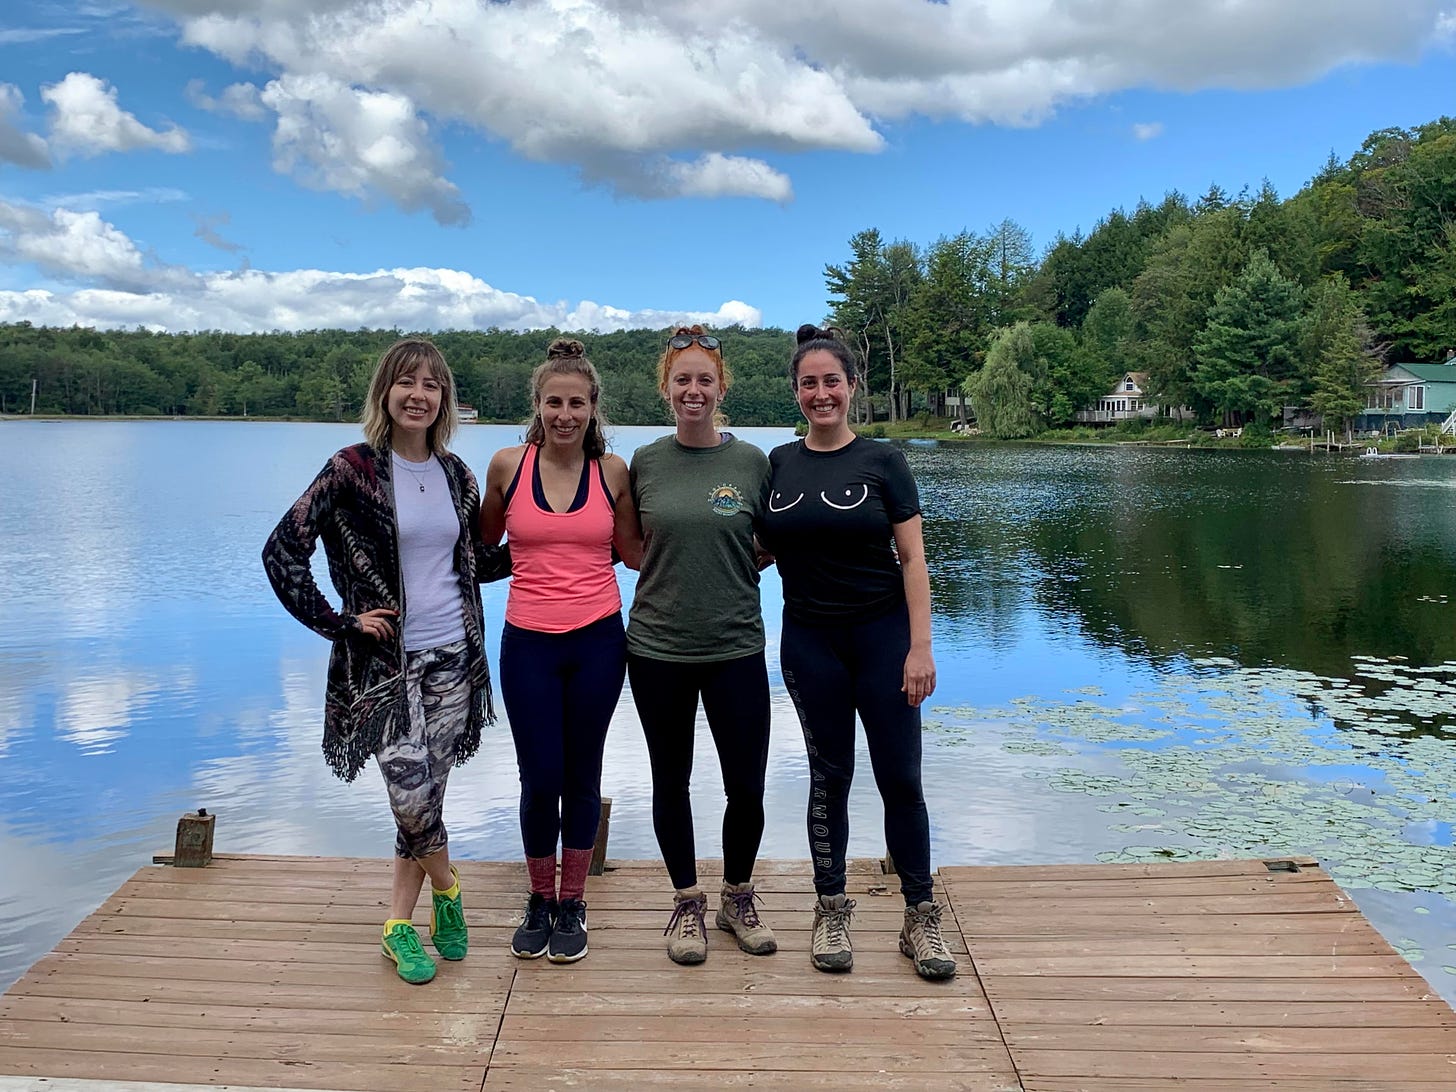 Four women standing on a pier at a lake with trees in the background